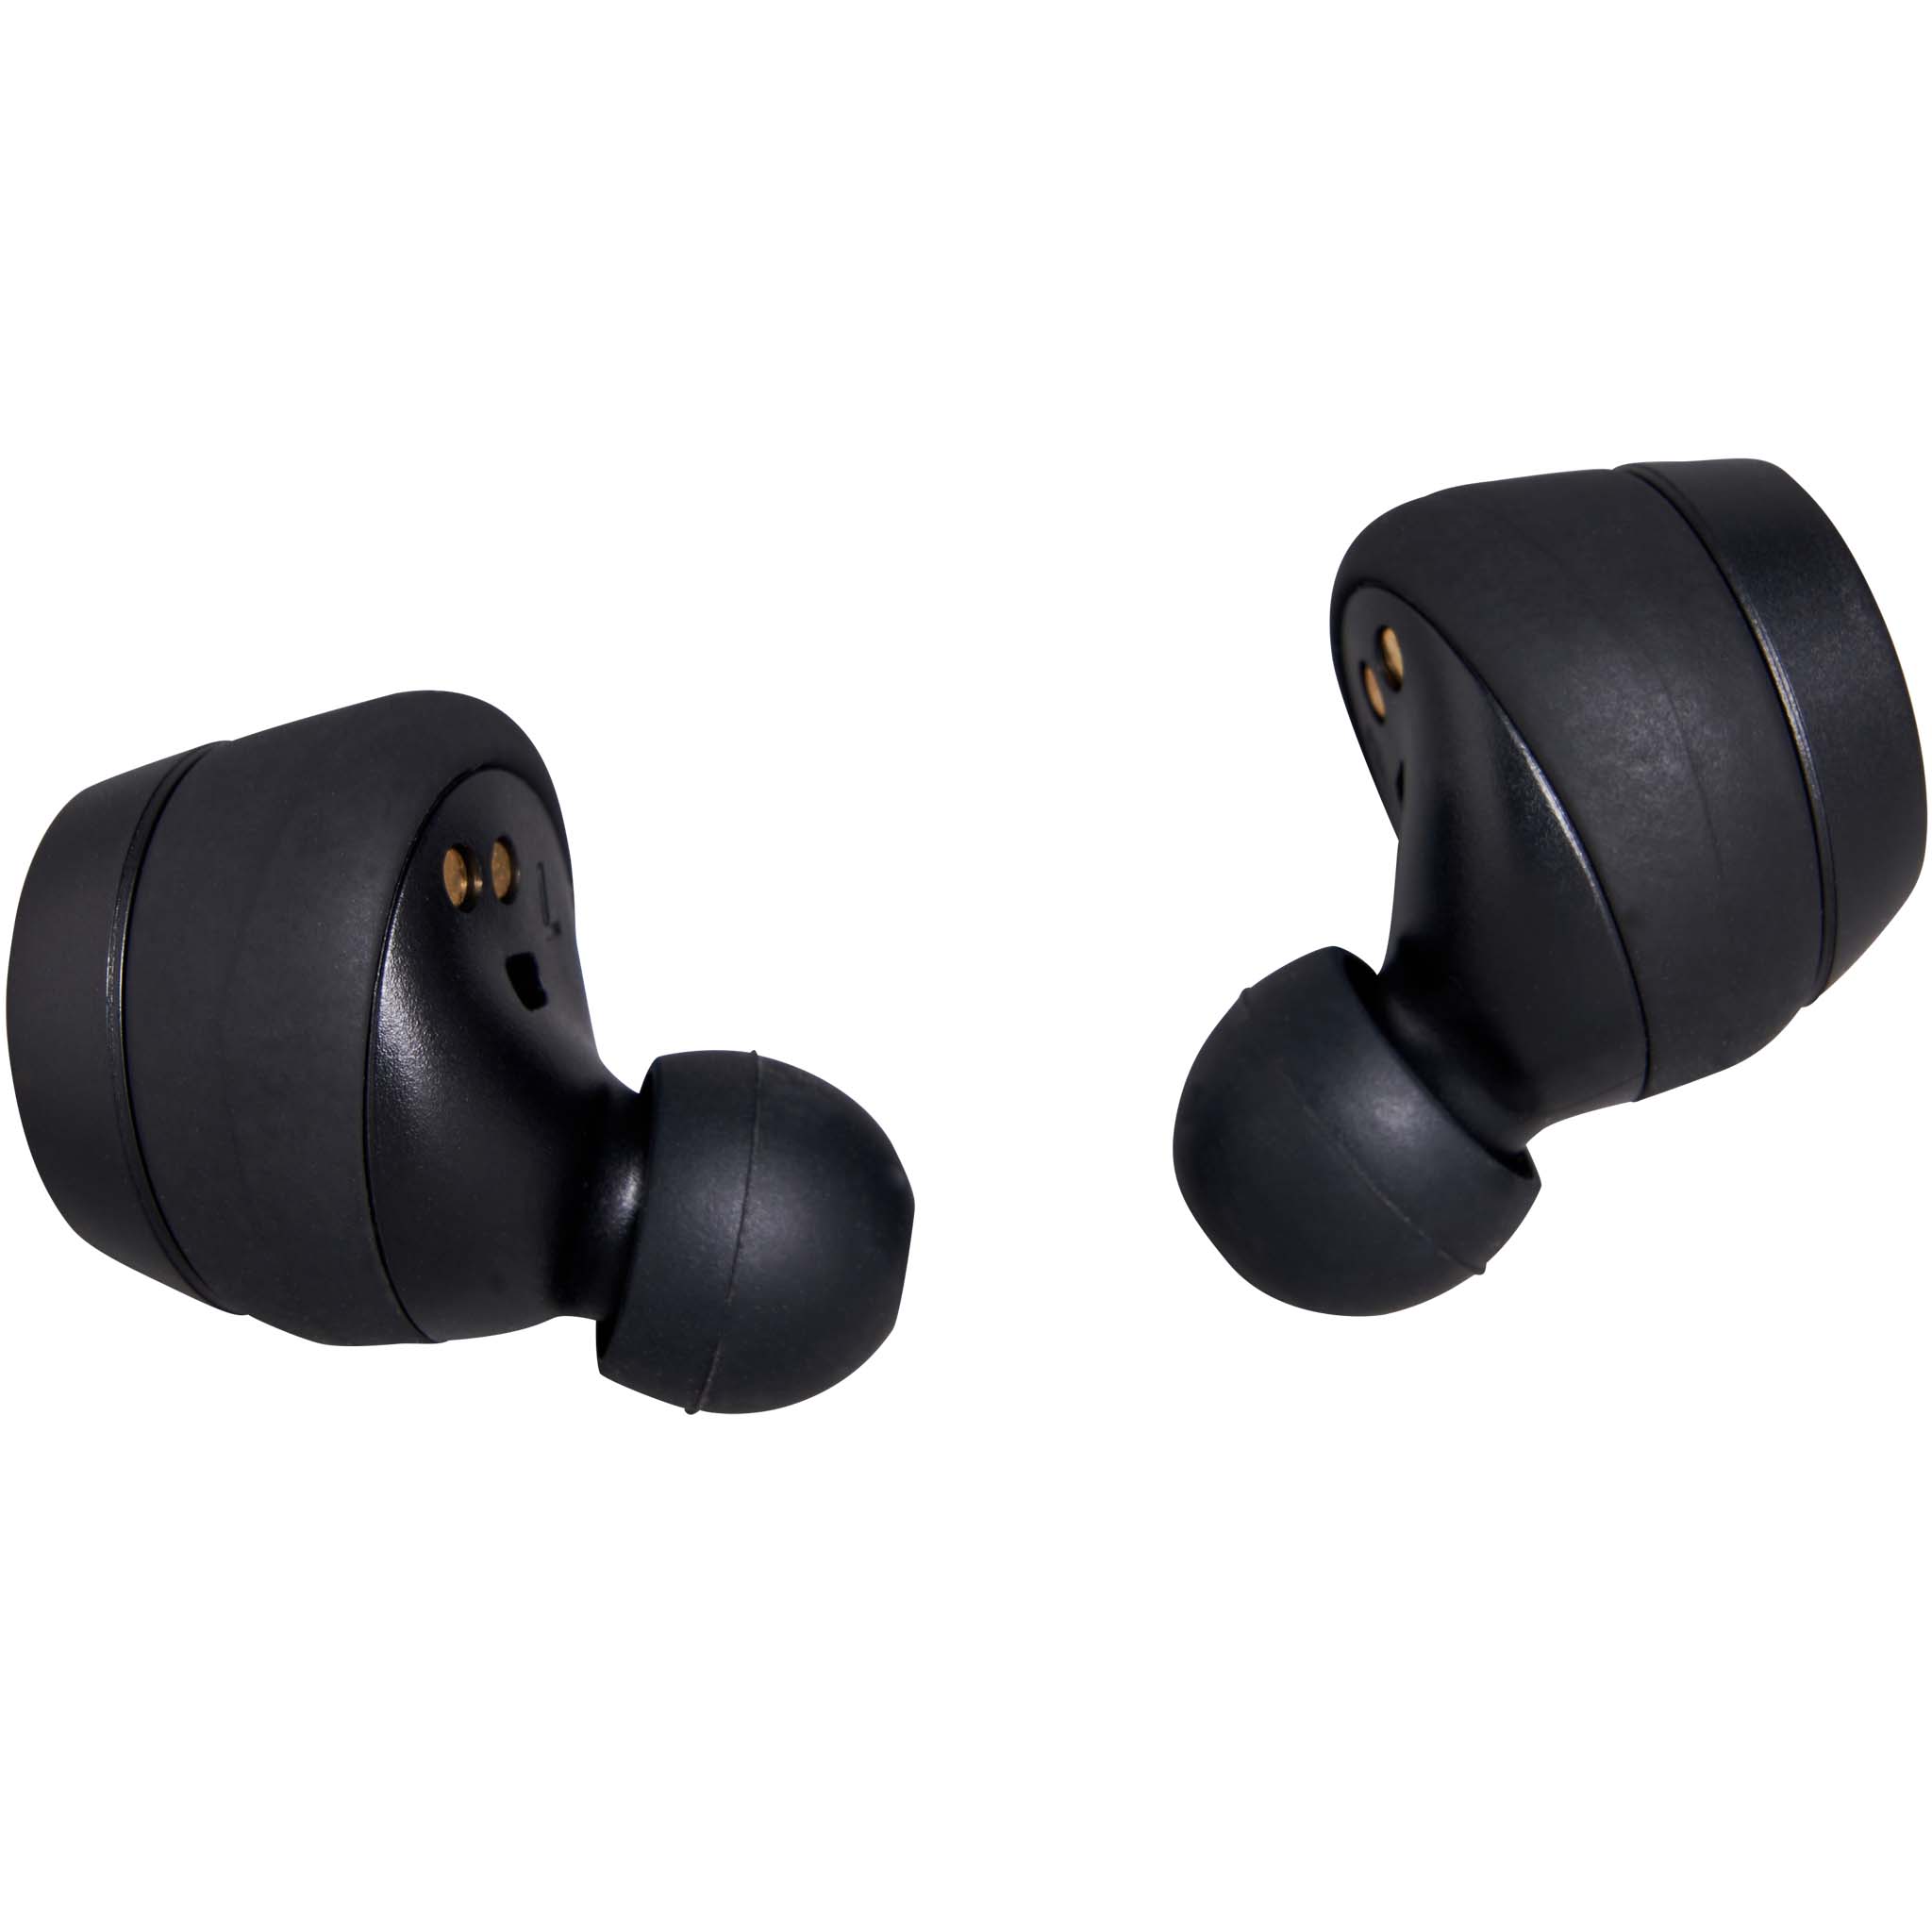 Outdoor Tech Mantas 2.0 Wireless Earbuds with Rechargable Case